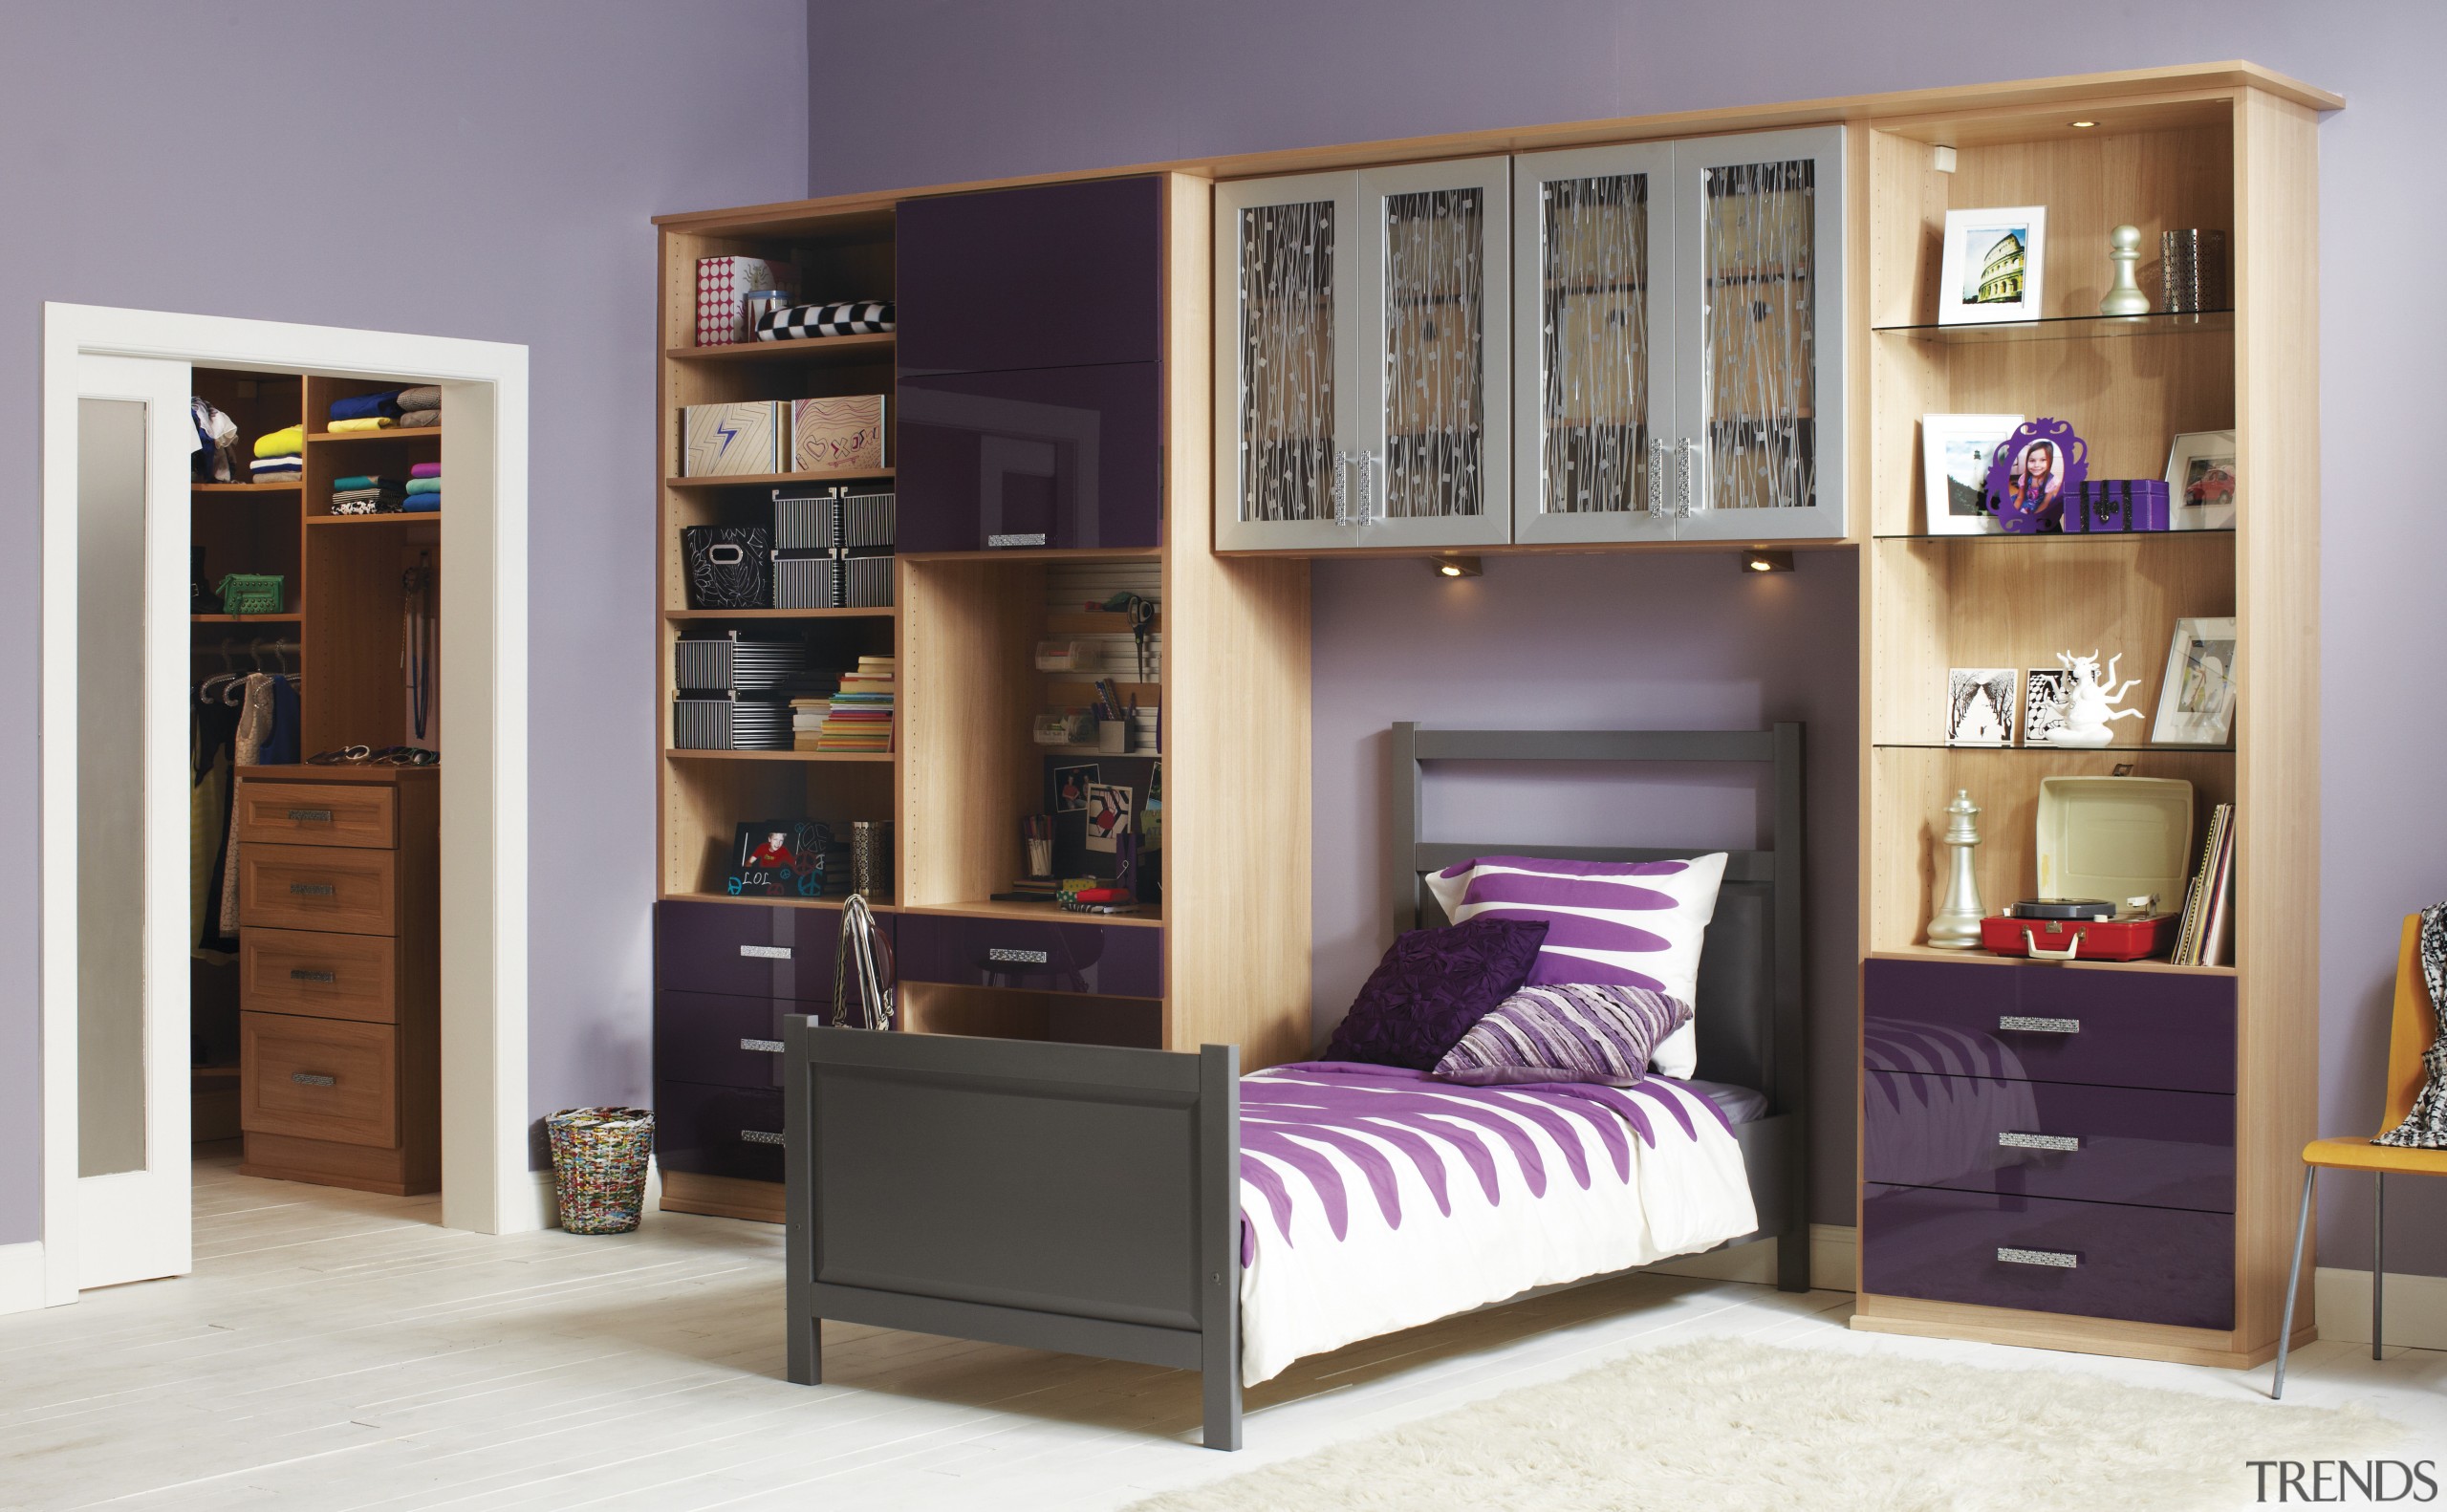 Seen here is a storage system/closet designed and bed, bed frame, bookcase, furniture, product, room, shelf, shelving, wardrobe, gray, white